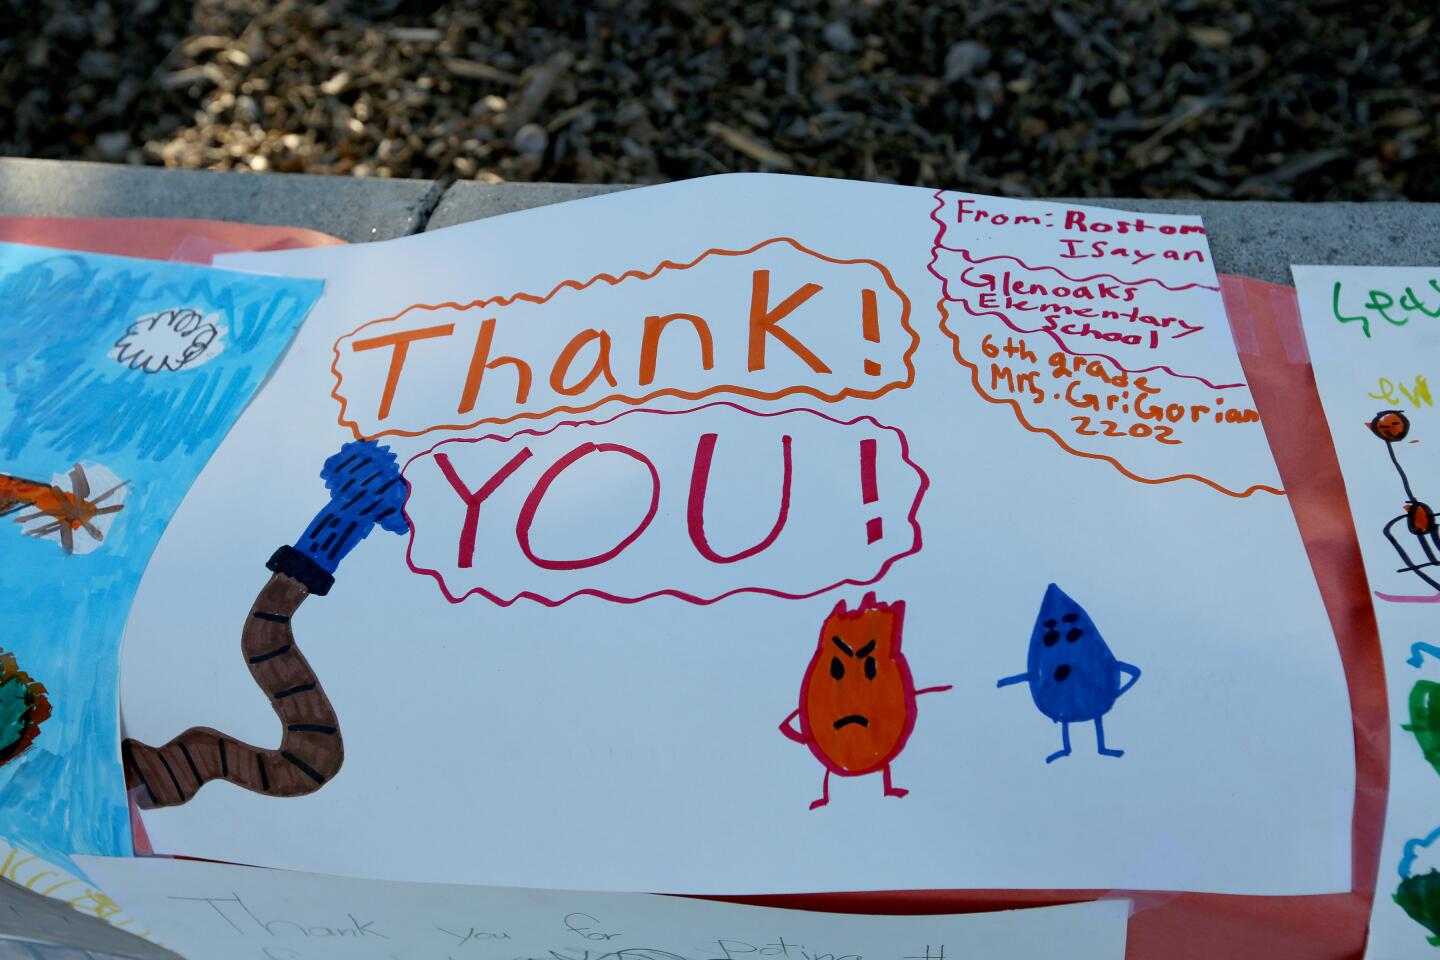 Glenoaks Elementary School was decorated with Òthank YouÓ signs made by students for the Glendale Fire Dept. and L.A. City Fire Dept. for fighting a fire that came close to their school, on campus in Glendale on Friday, Aug. 30, 2019. L.A. City Fire Dept. and GFD battled a stubborn fire this past weekend that came close to the school and to homes in the neighborhood.